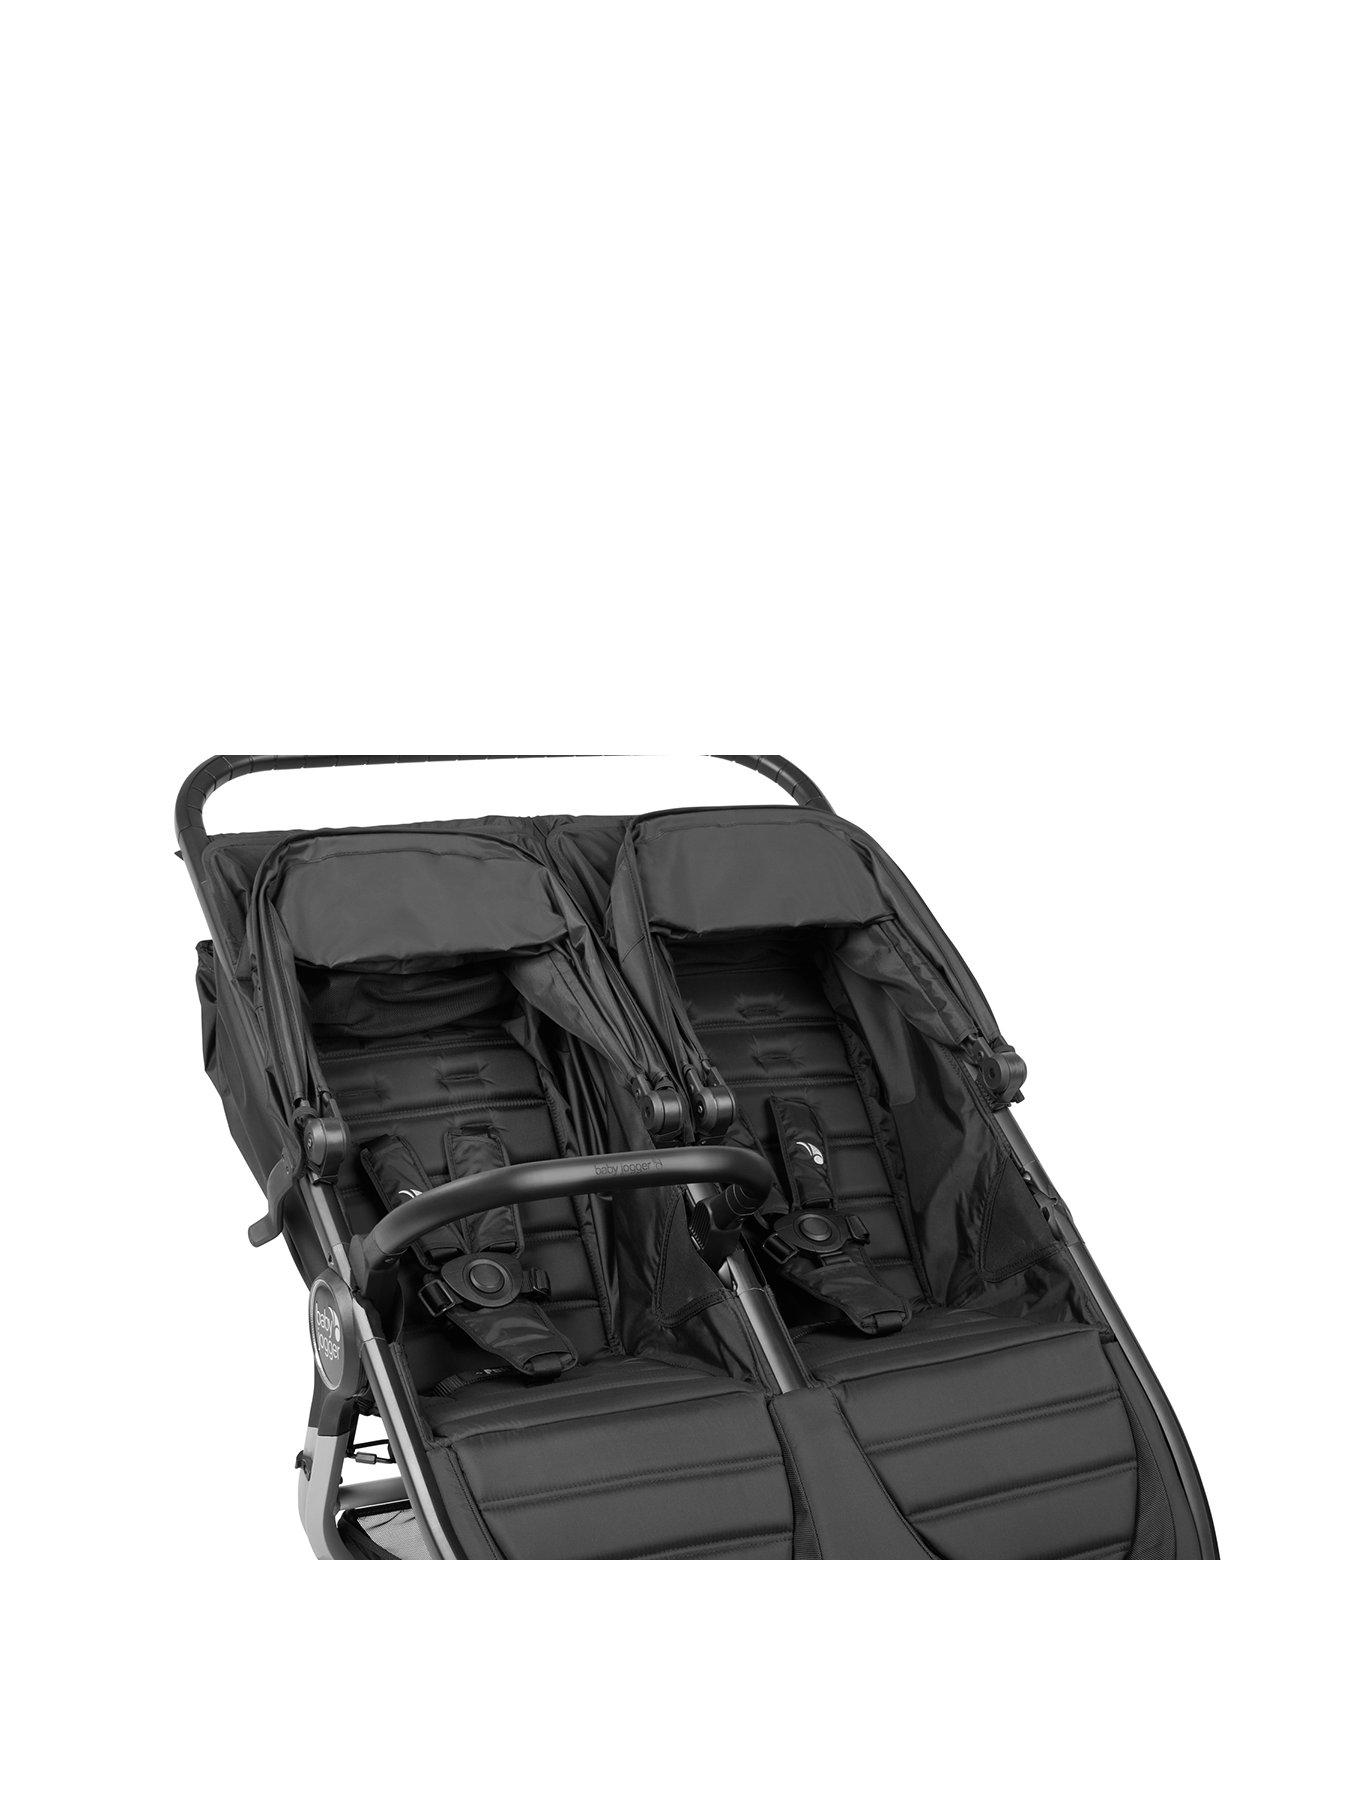 Sanctuary Whitney Løb Baby Jogger City Mini 2 Double (Single) belly bar | littlewoods.com